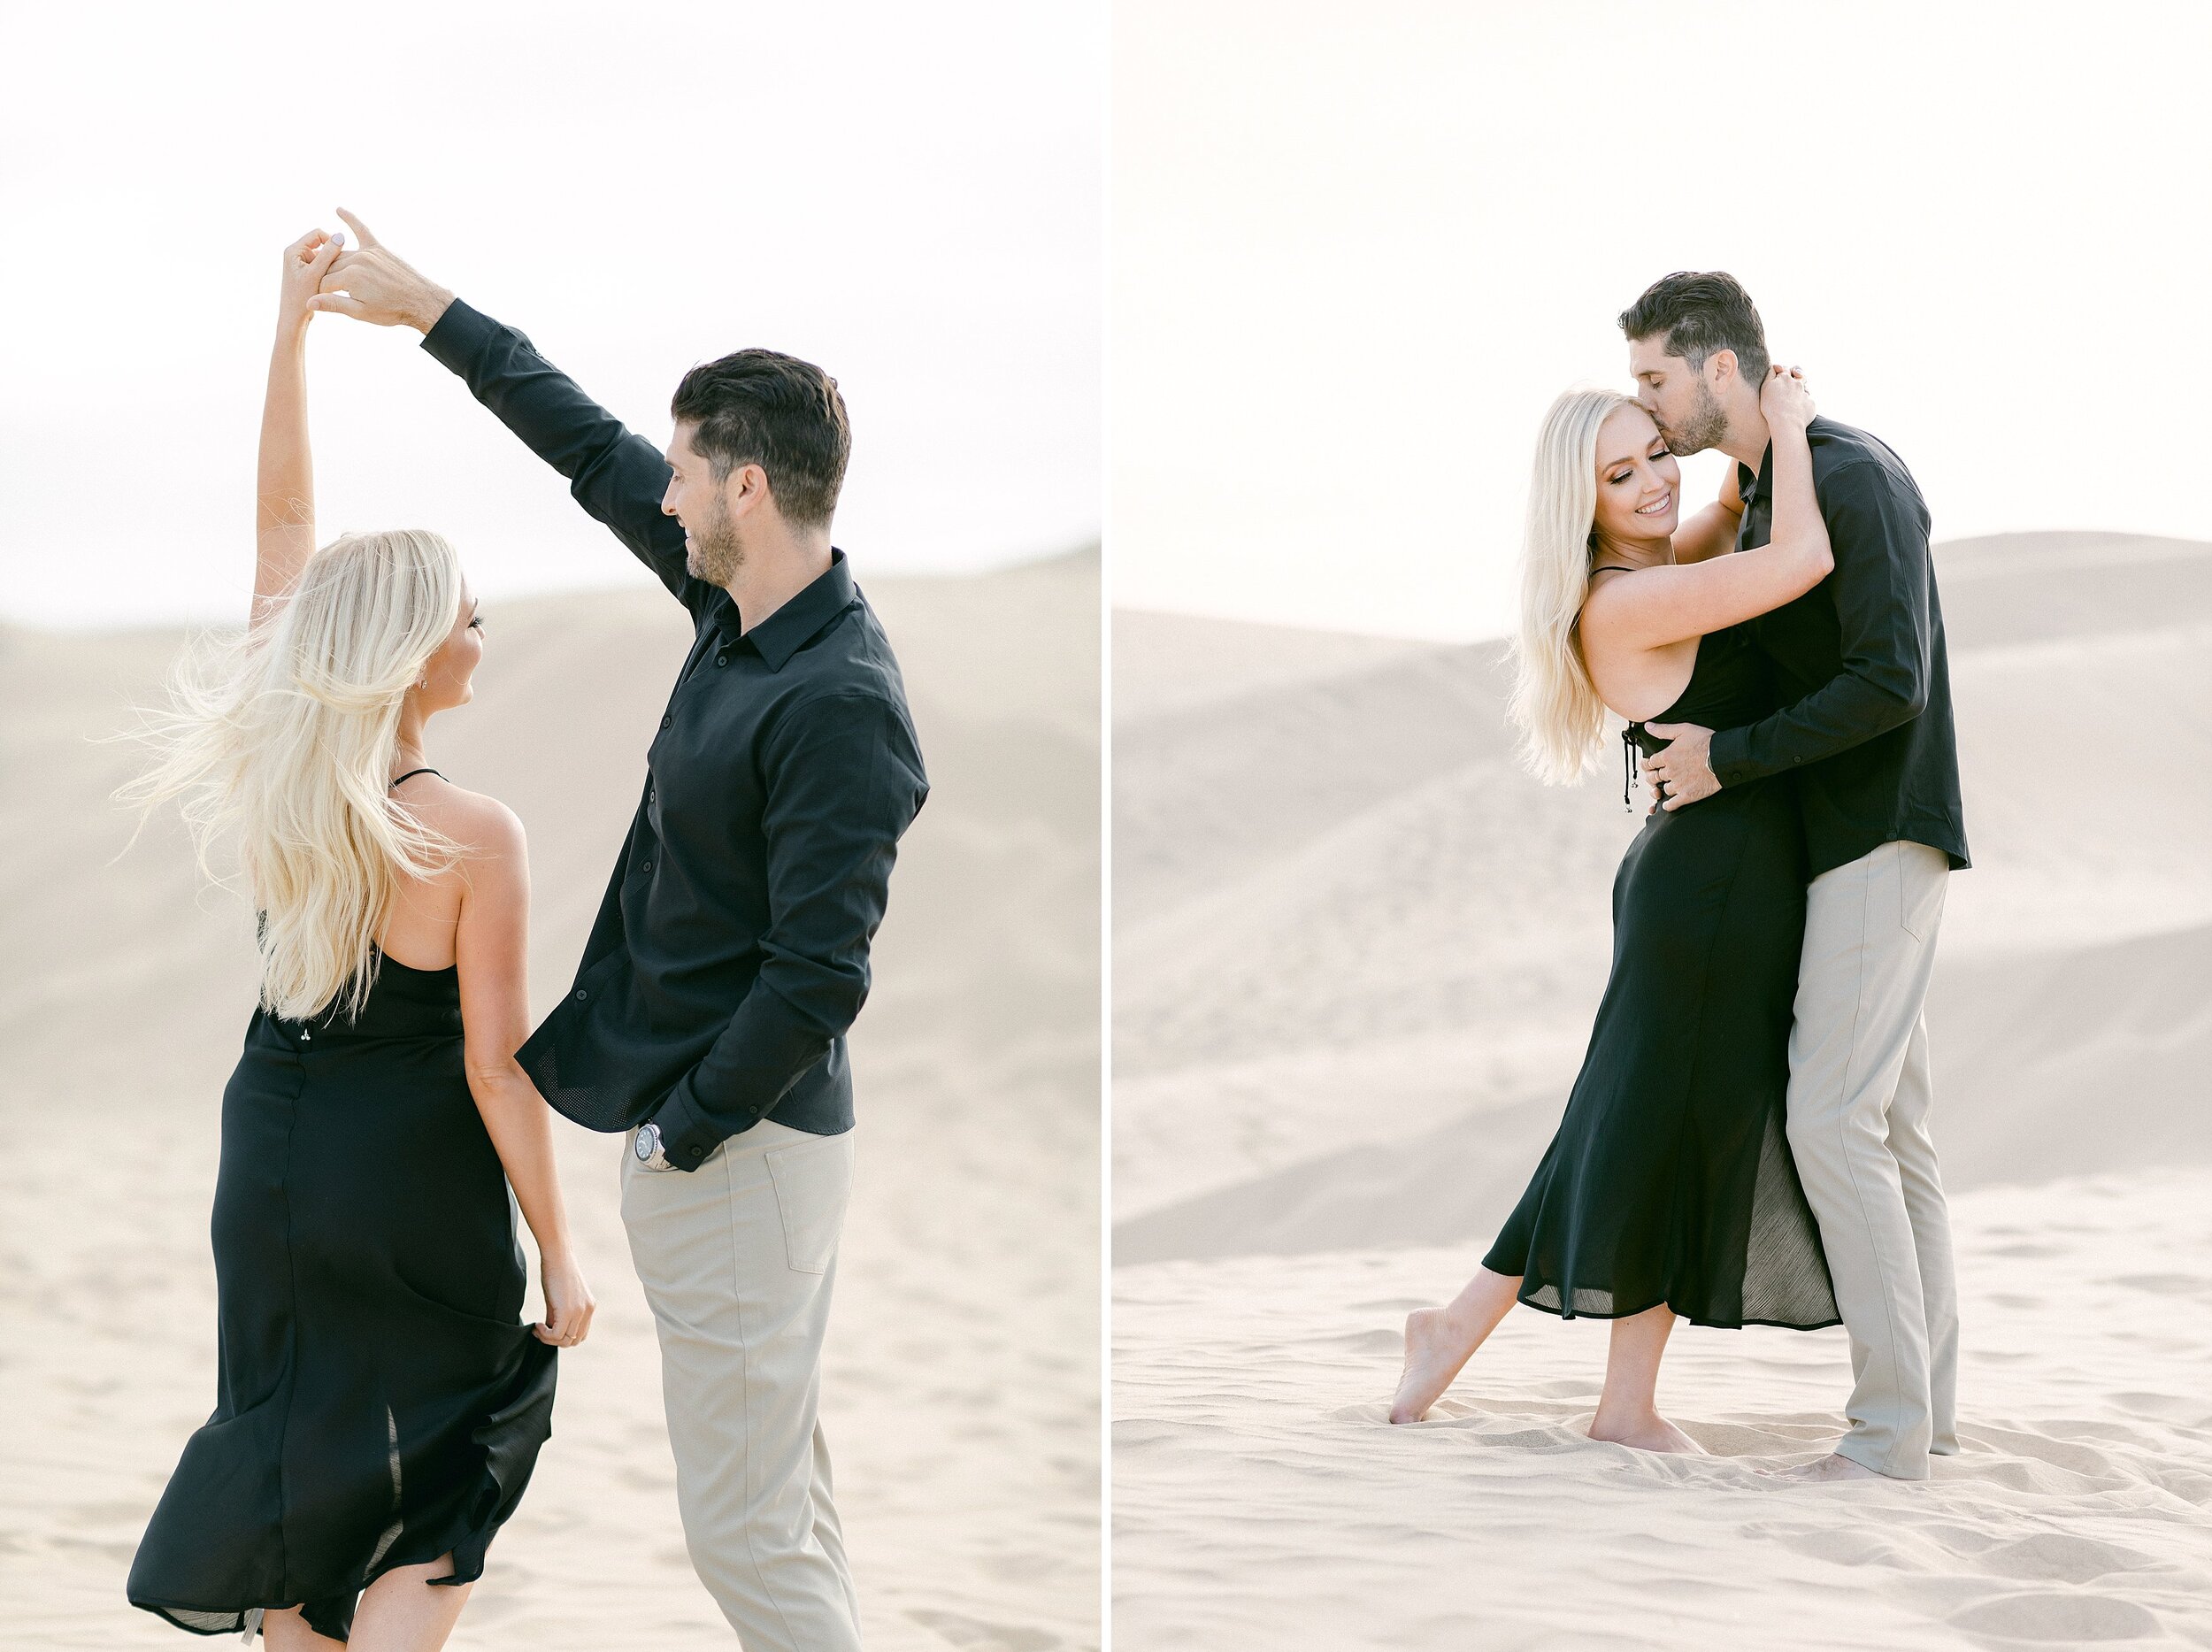 Fiances dance with each other in the sand dunes 